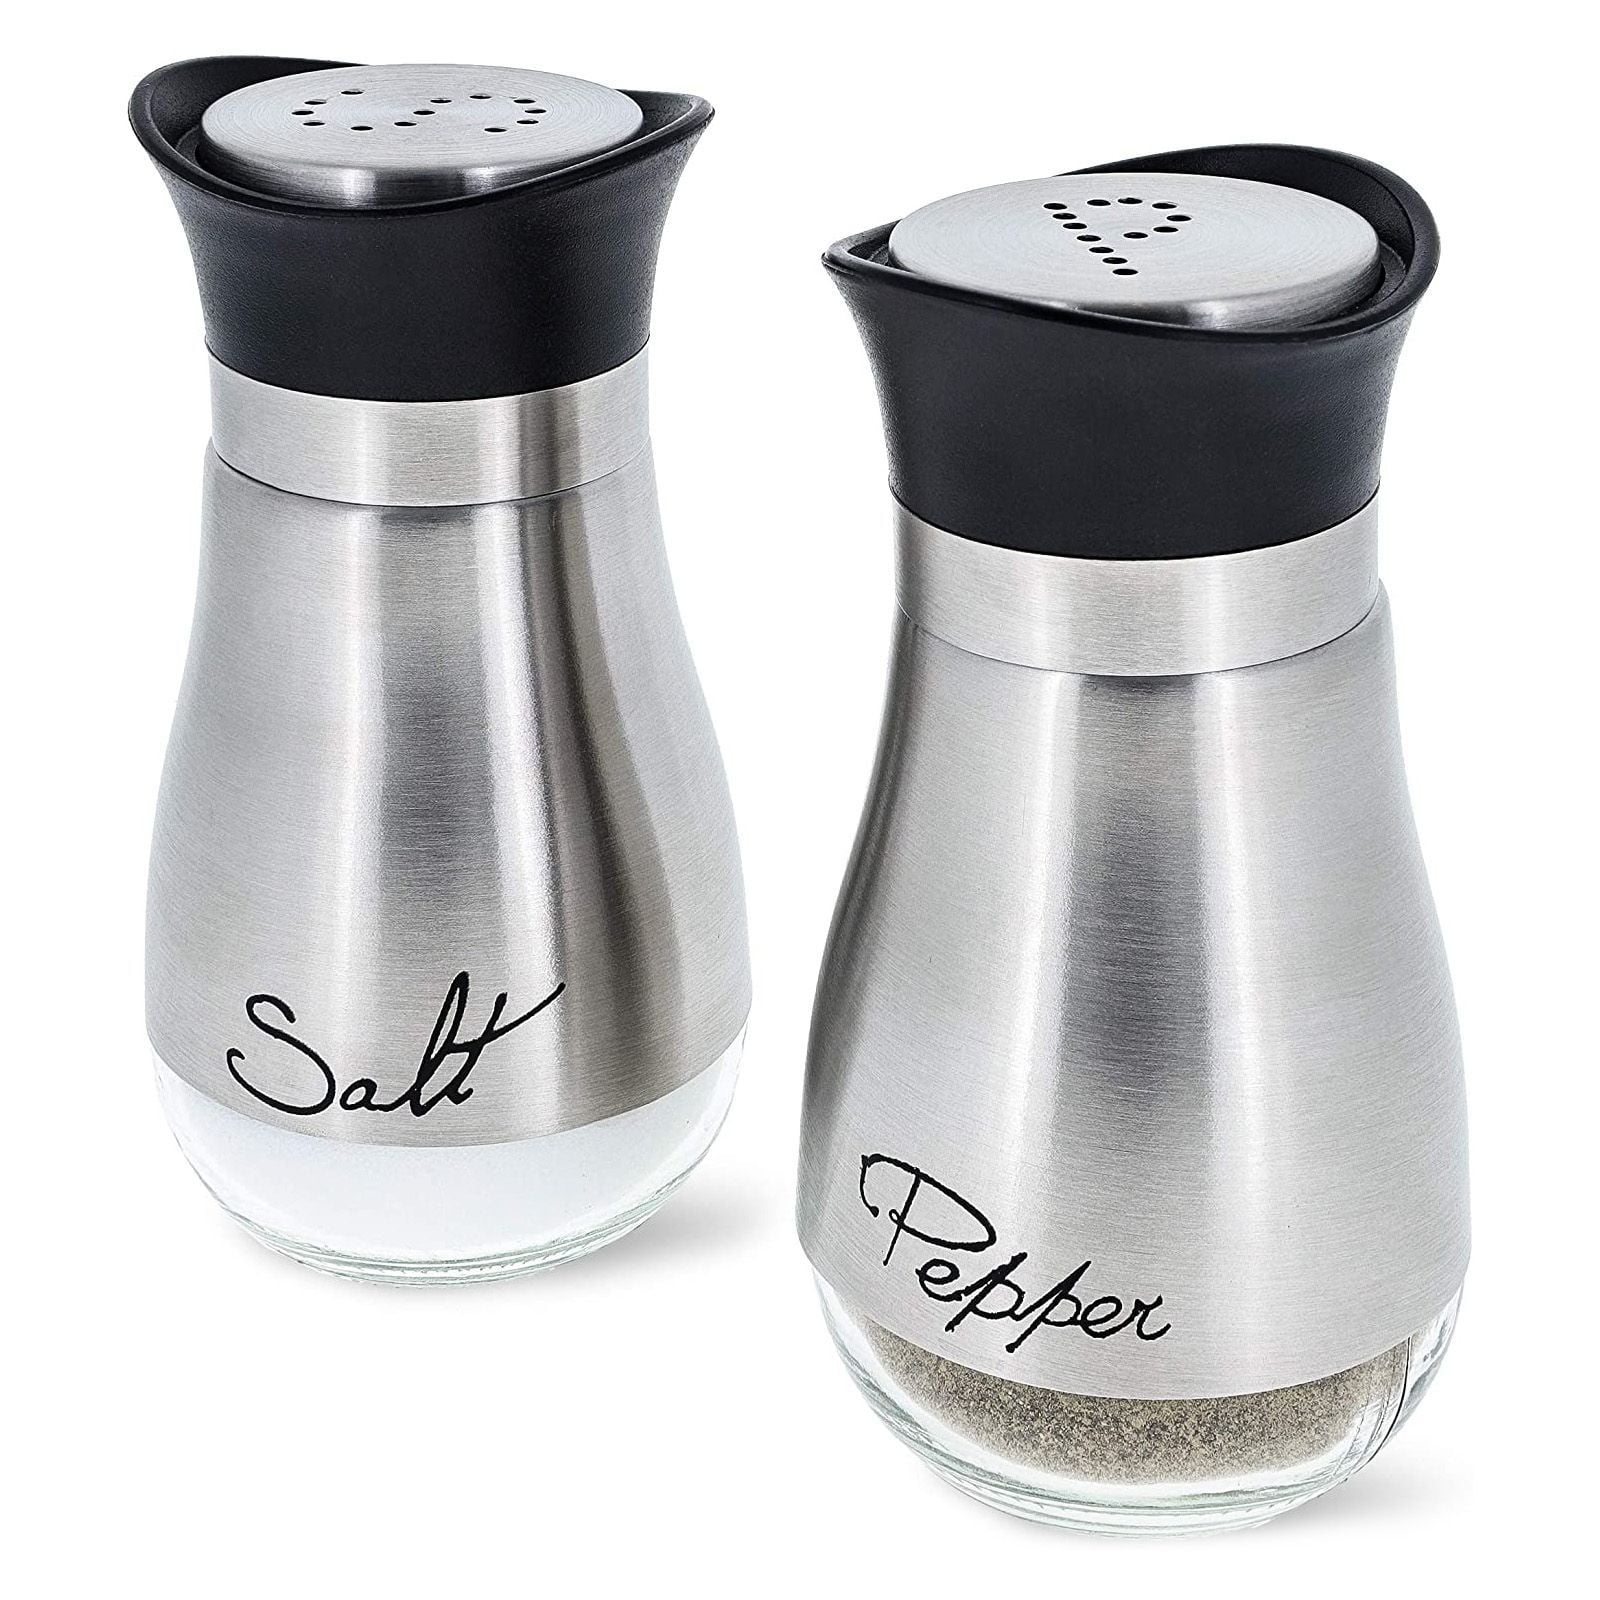 2pcs Elegant Stainless Steel Salt and Pepper Shakers Set with Clear Glass Bottom 